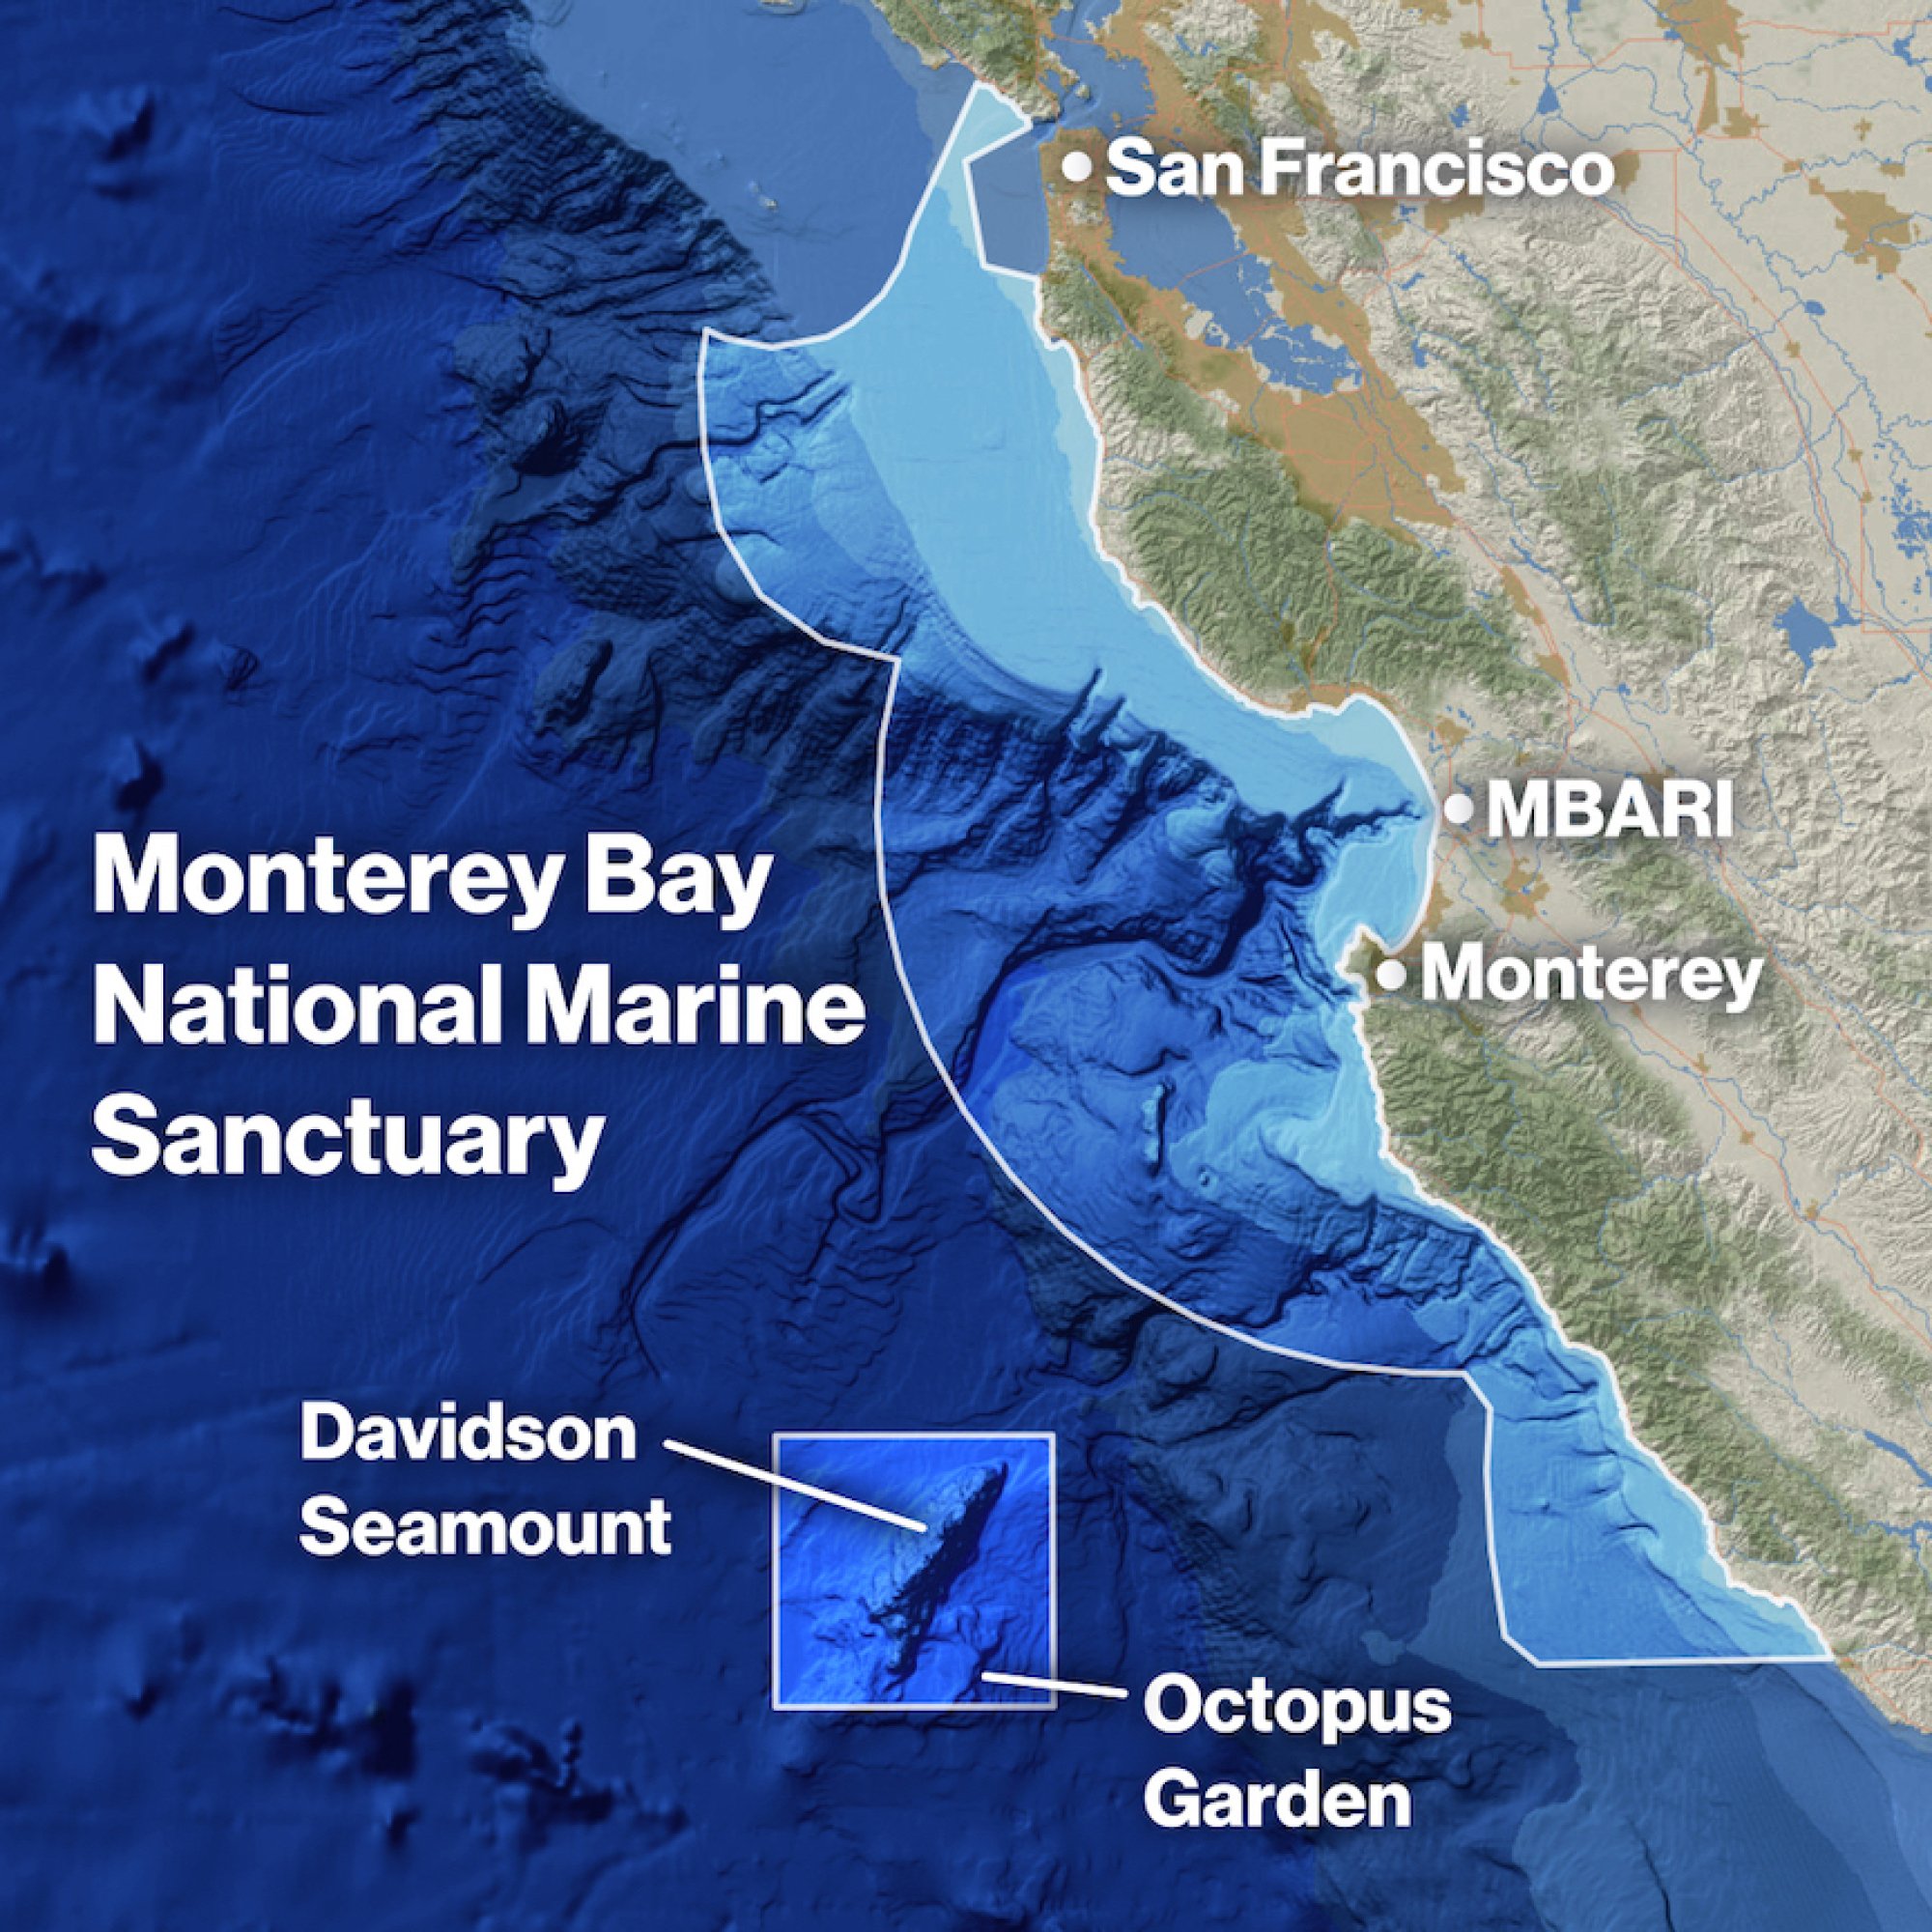 The location of the expansive octopus garden off the coast of Central California.